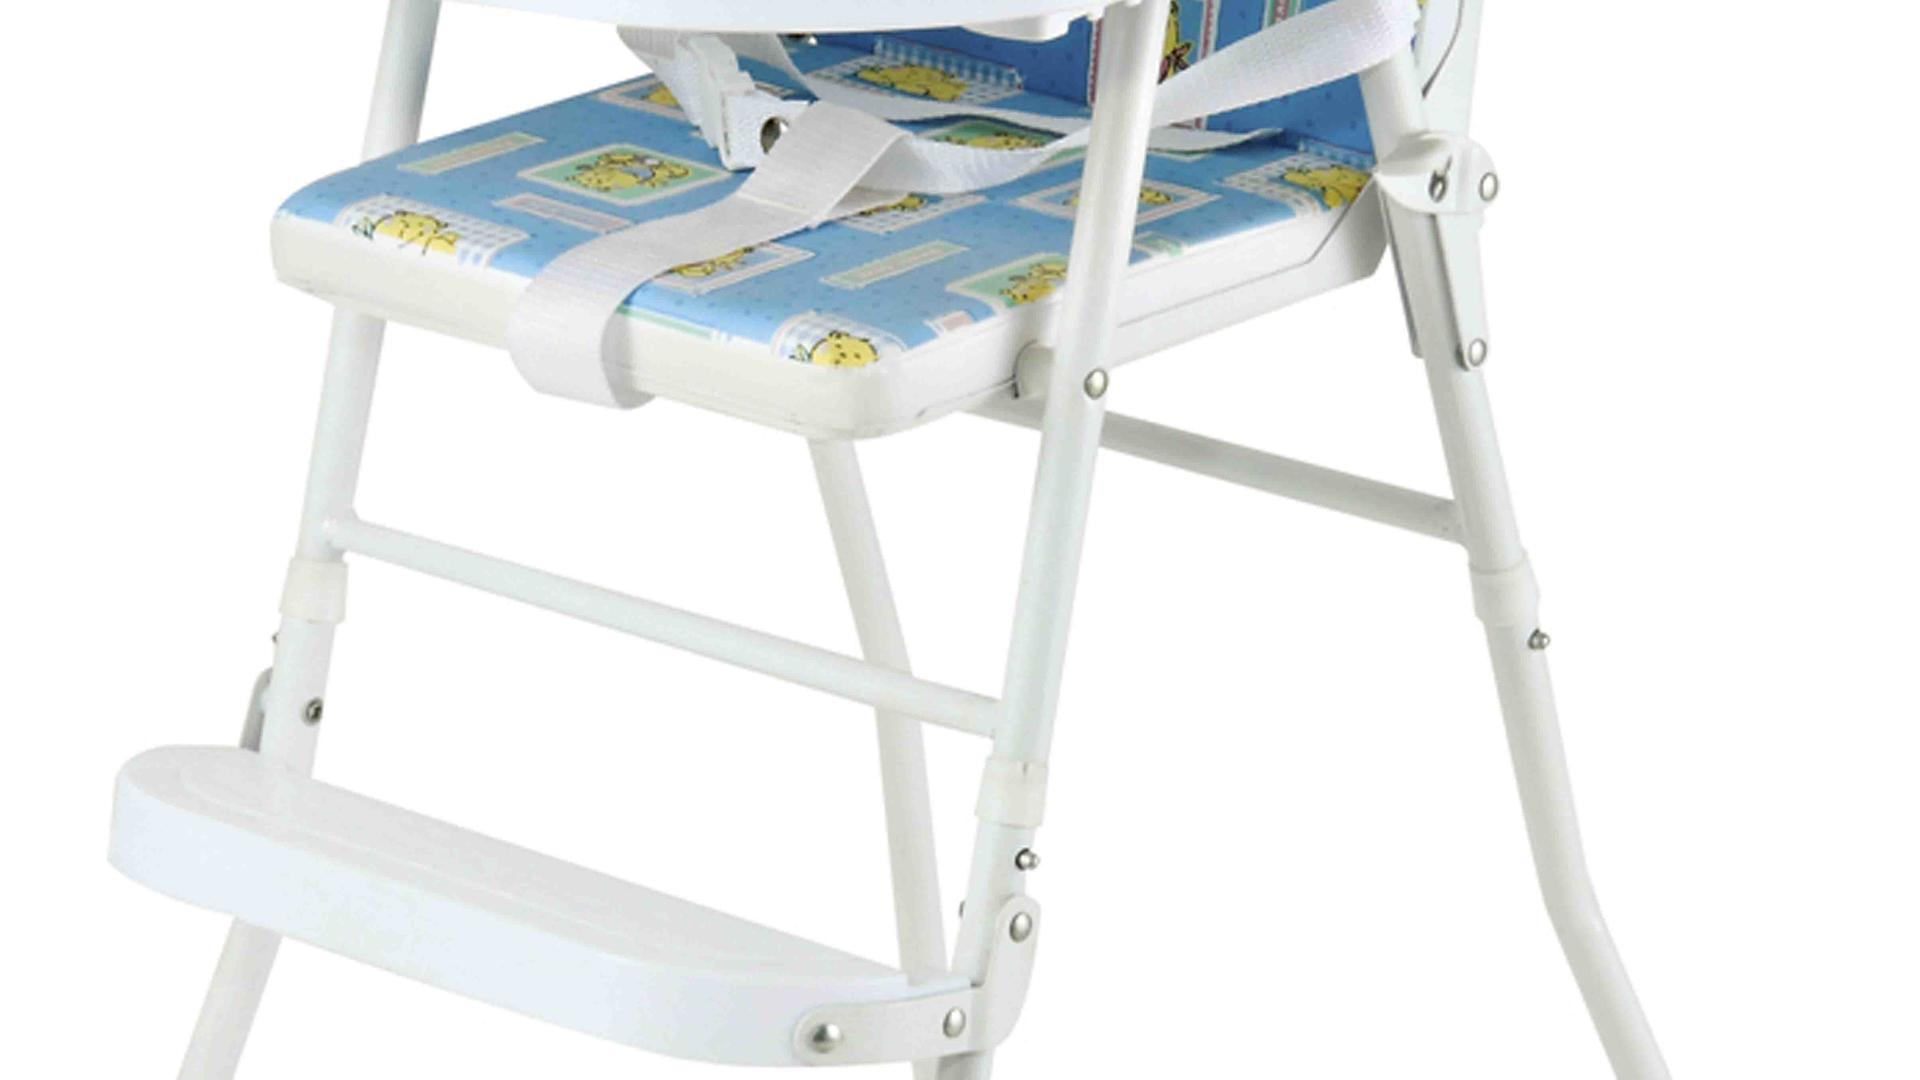 Aoqi baby chair price series for home